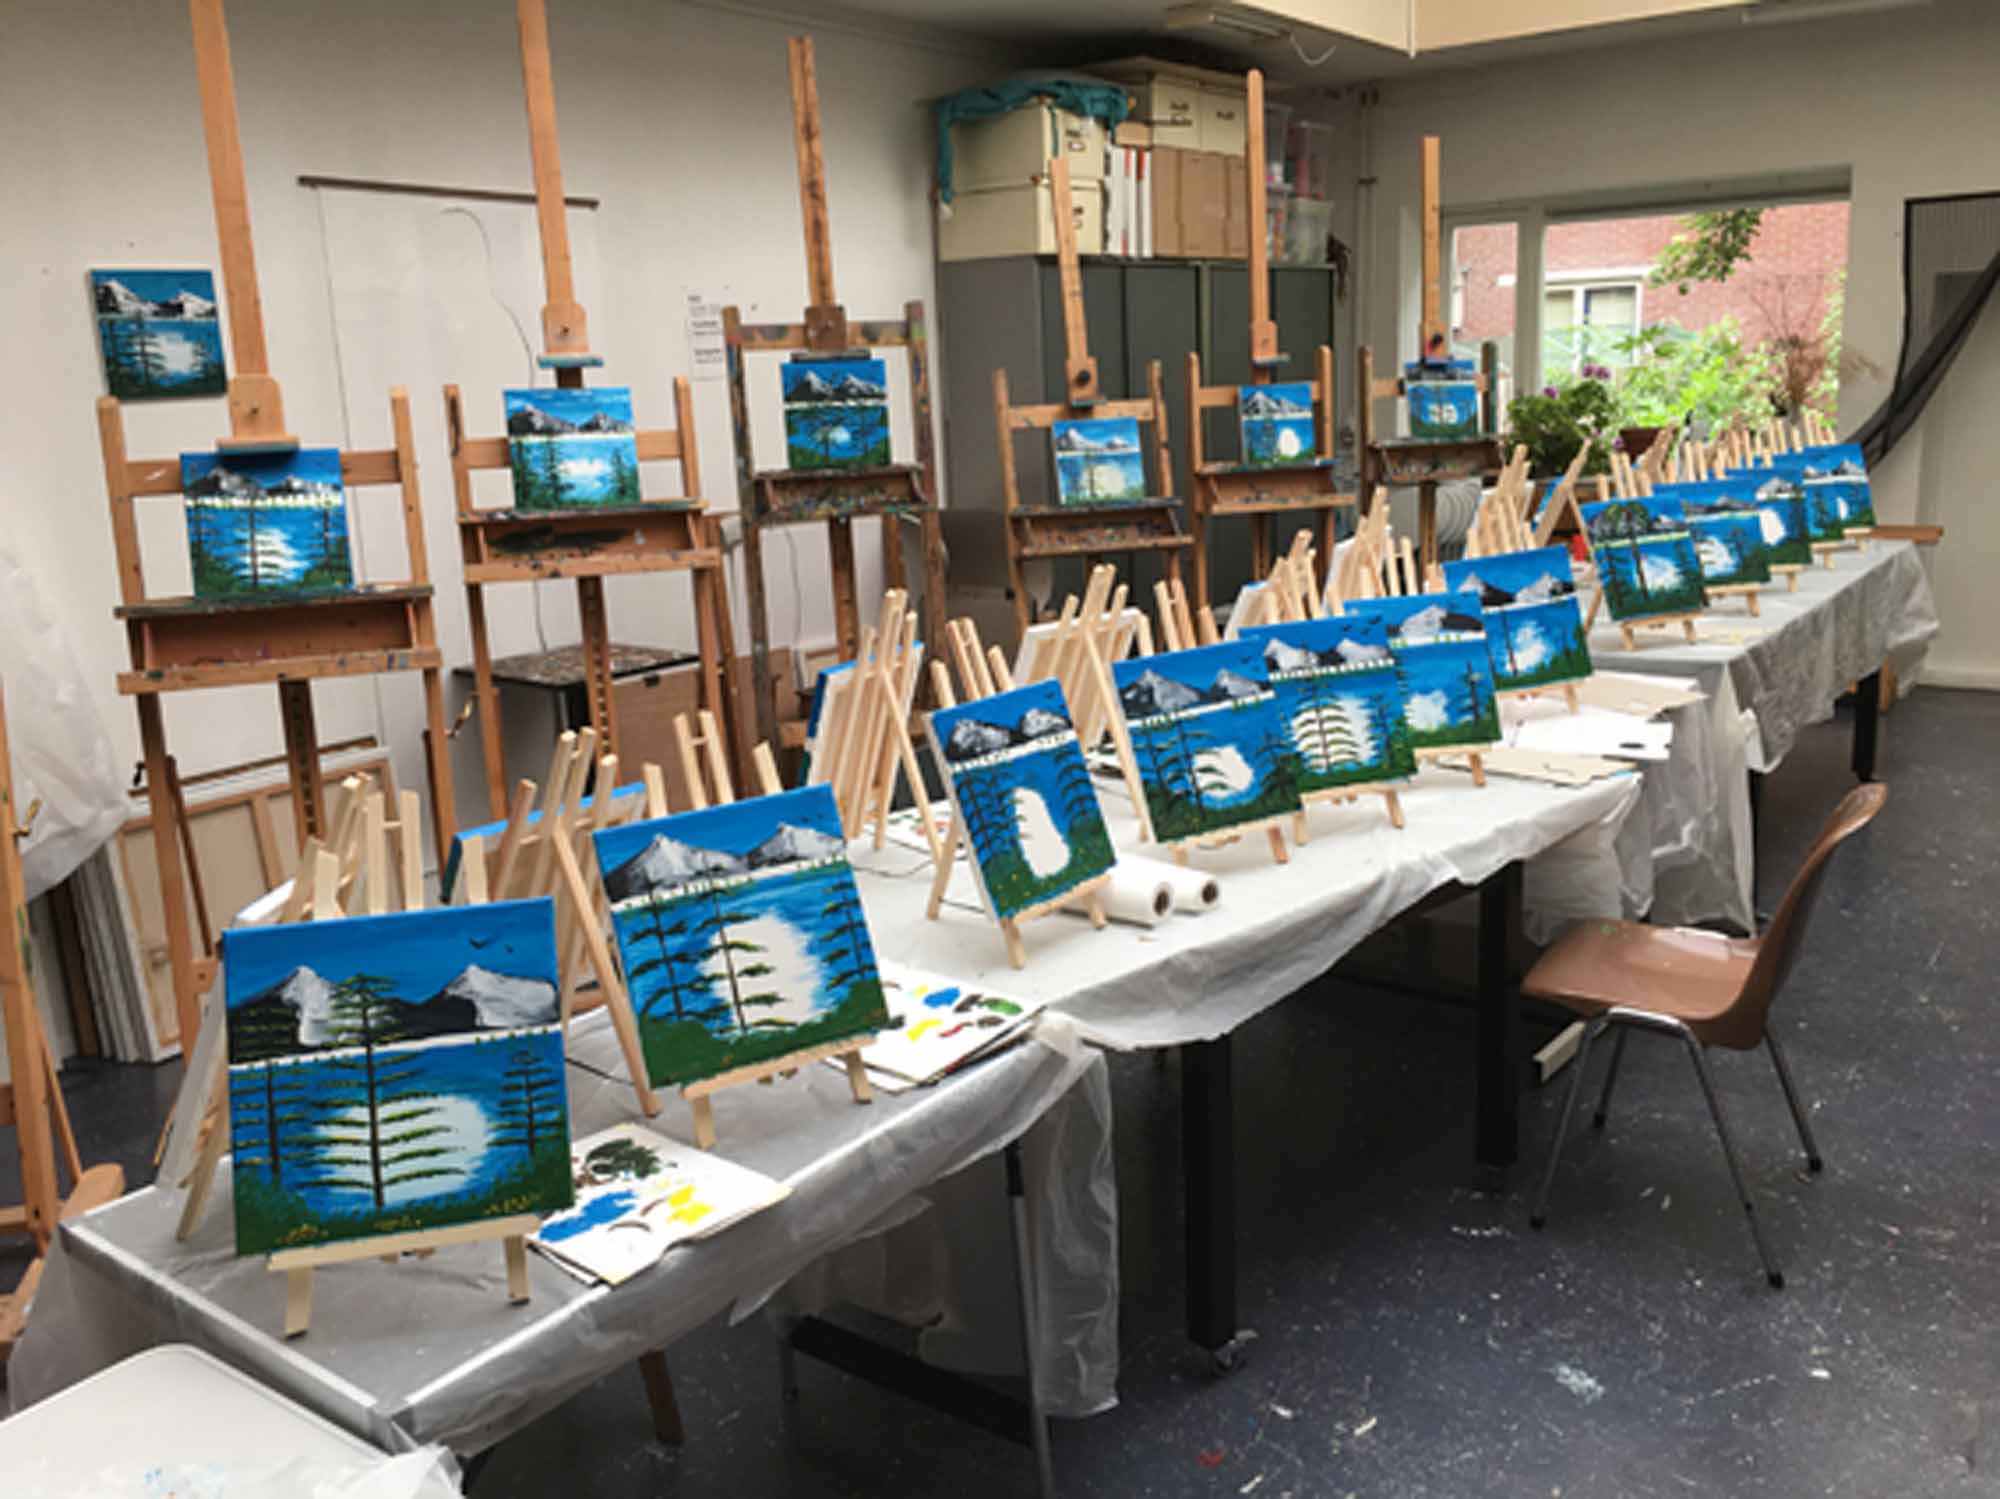 A row of easels and a row of tables in the artist studio with Bob Ross paintings in the making